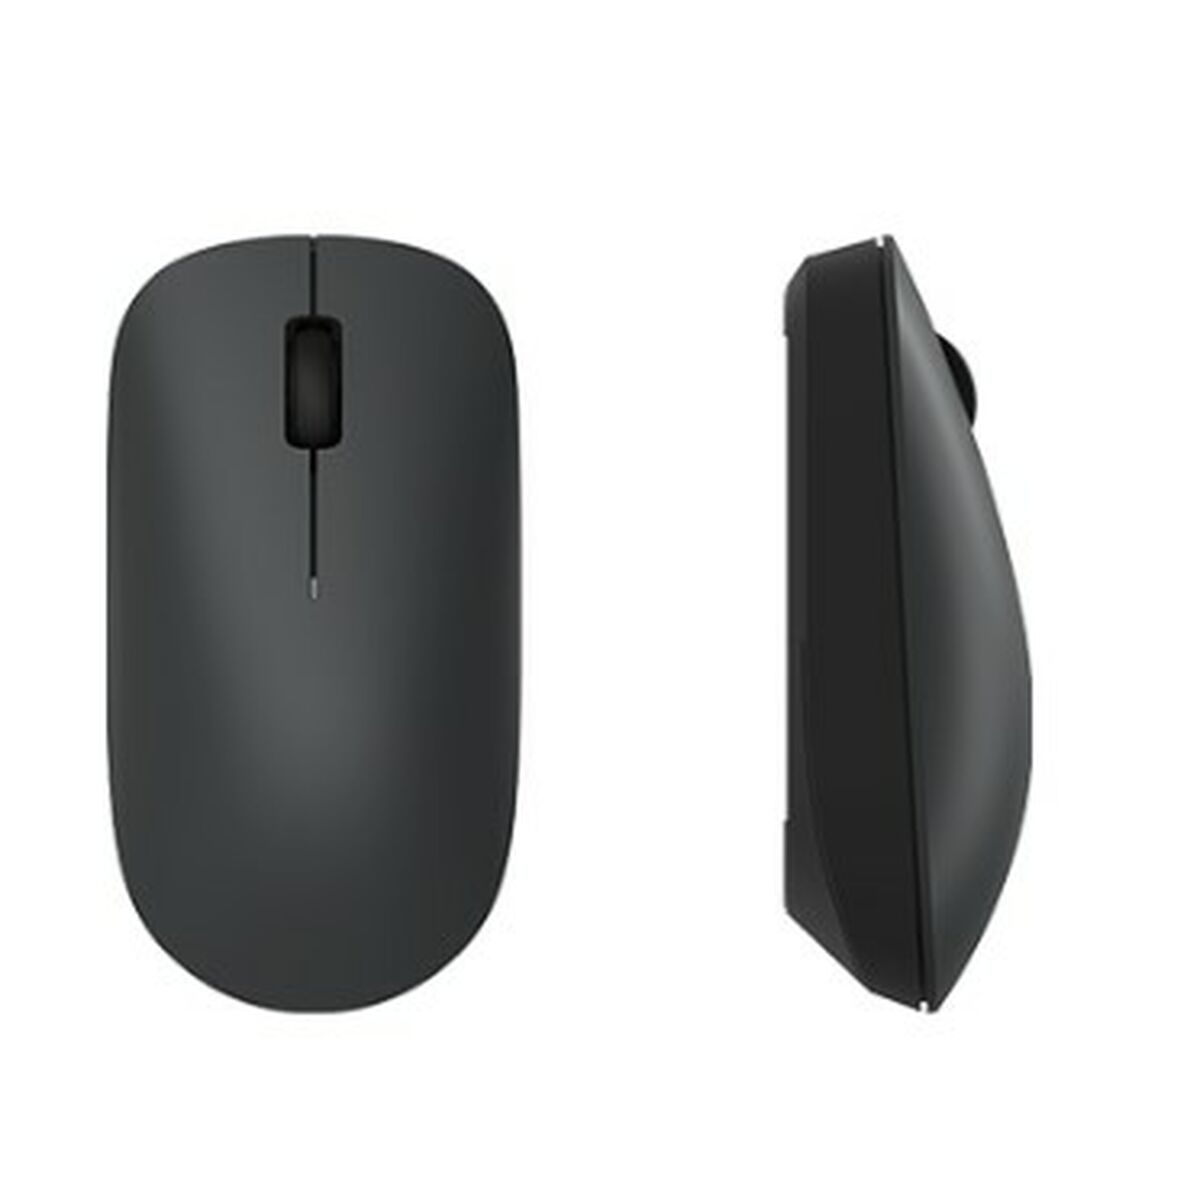 Wireless Mouse Xiaomi BHR6099GL Black 1000 dpi (1 Unit), Xiaomi, Computing, Accessories, wireless-mouse-xiaomi-bhr6099gl-black-1000-dpi-1-unit, Brand_Xiaomi, category-reference-2609, category-reference-2642, category-reference-2656, category-reference-t-19685, category-reference-t-19908, category-reference-t-21353, computers / peripherals, Condition_NEW, office, Price_20 - 50, Teleworking, RiotNook